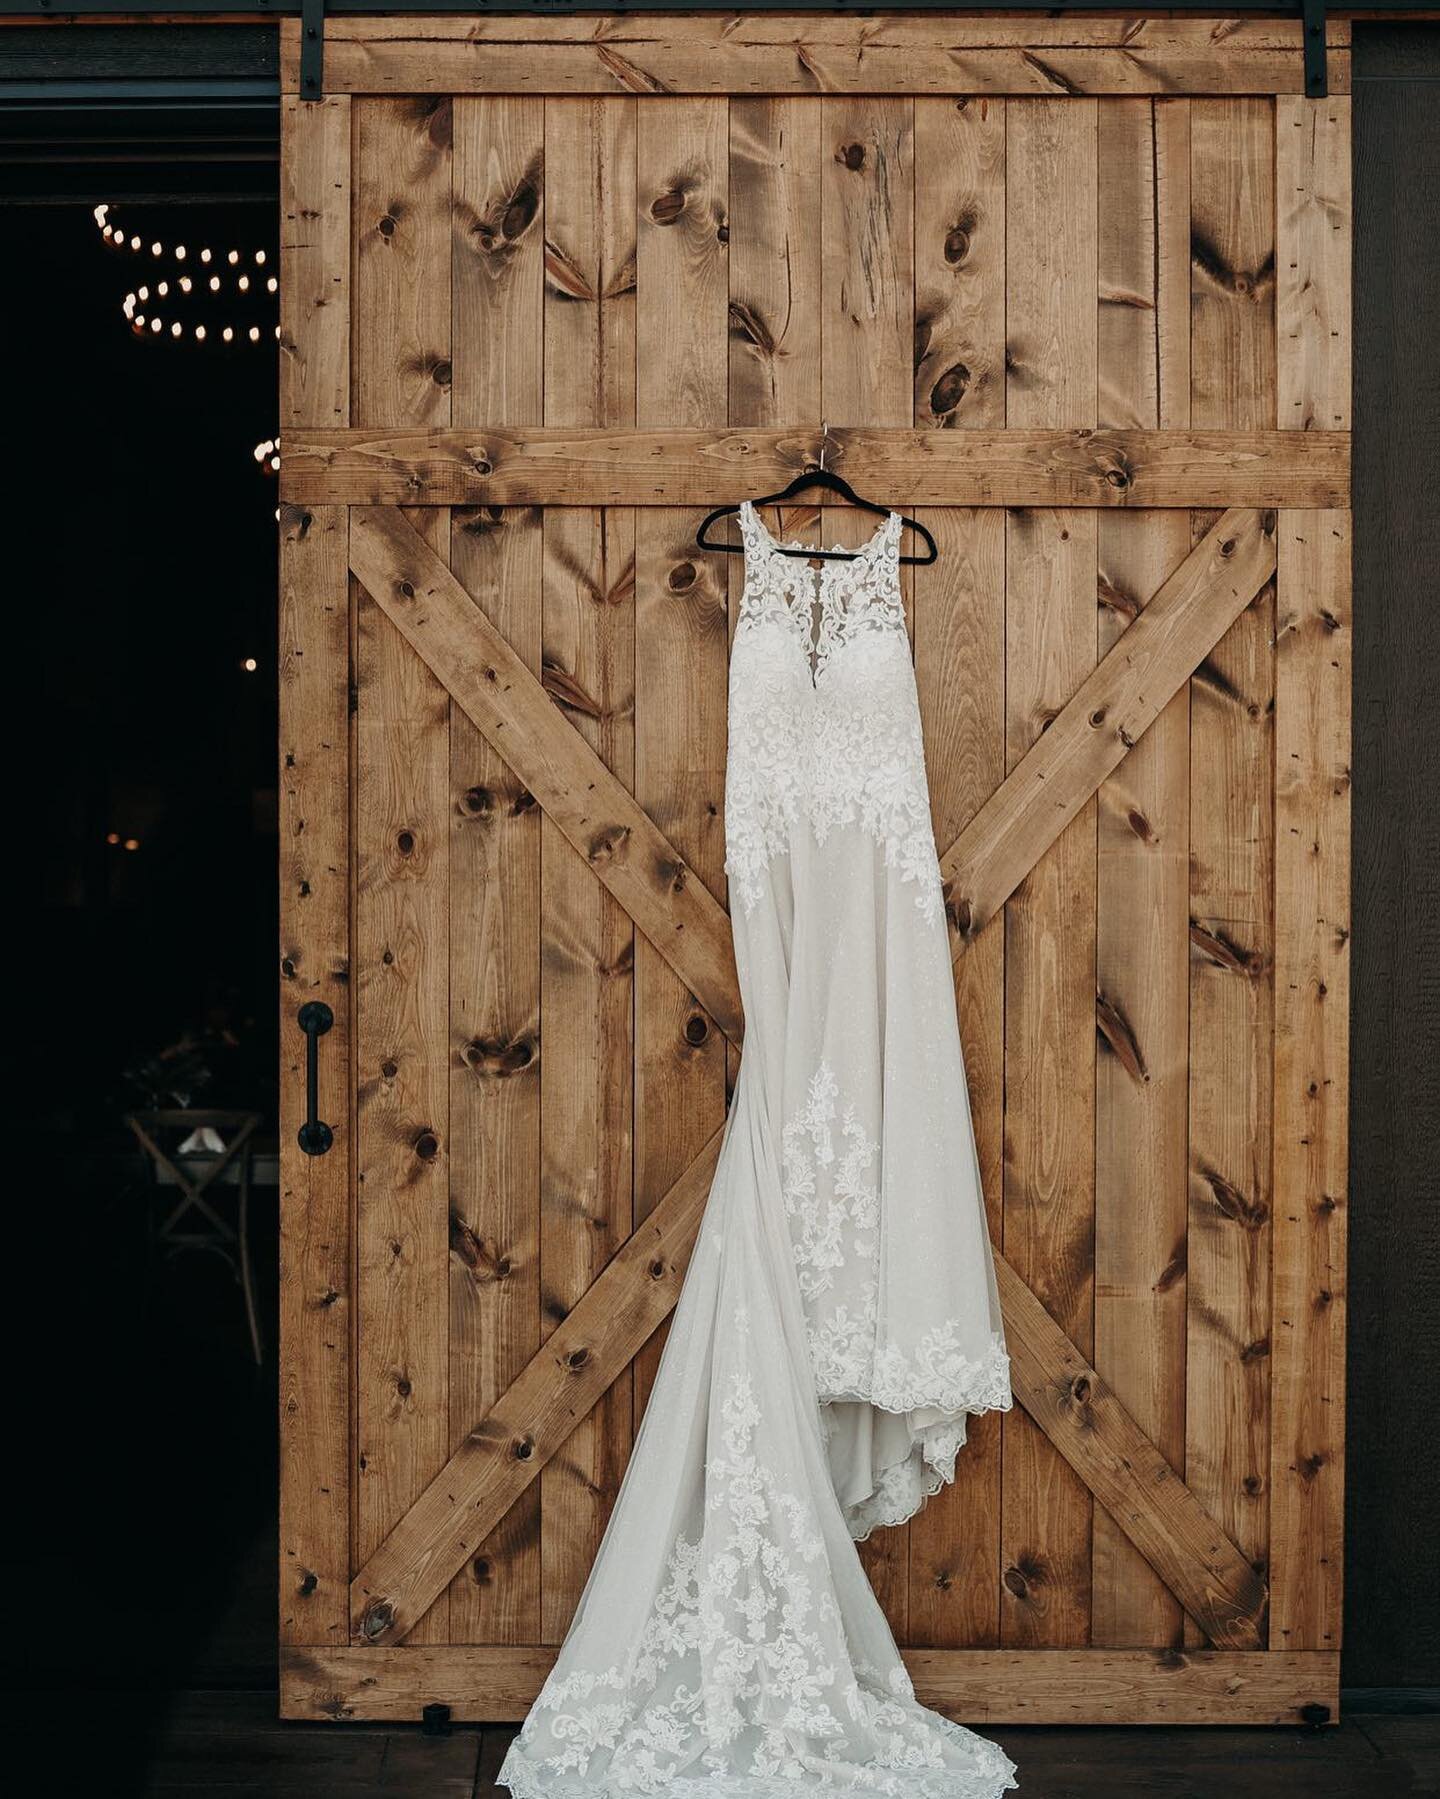 Letting the dress have it&rsquo;s moment🙌🏼

Our sliding barn doors are the perfect backdrop for your dress photos!